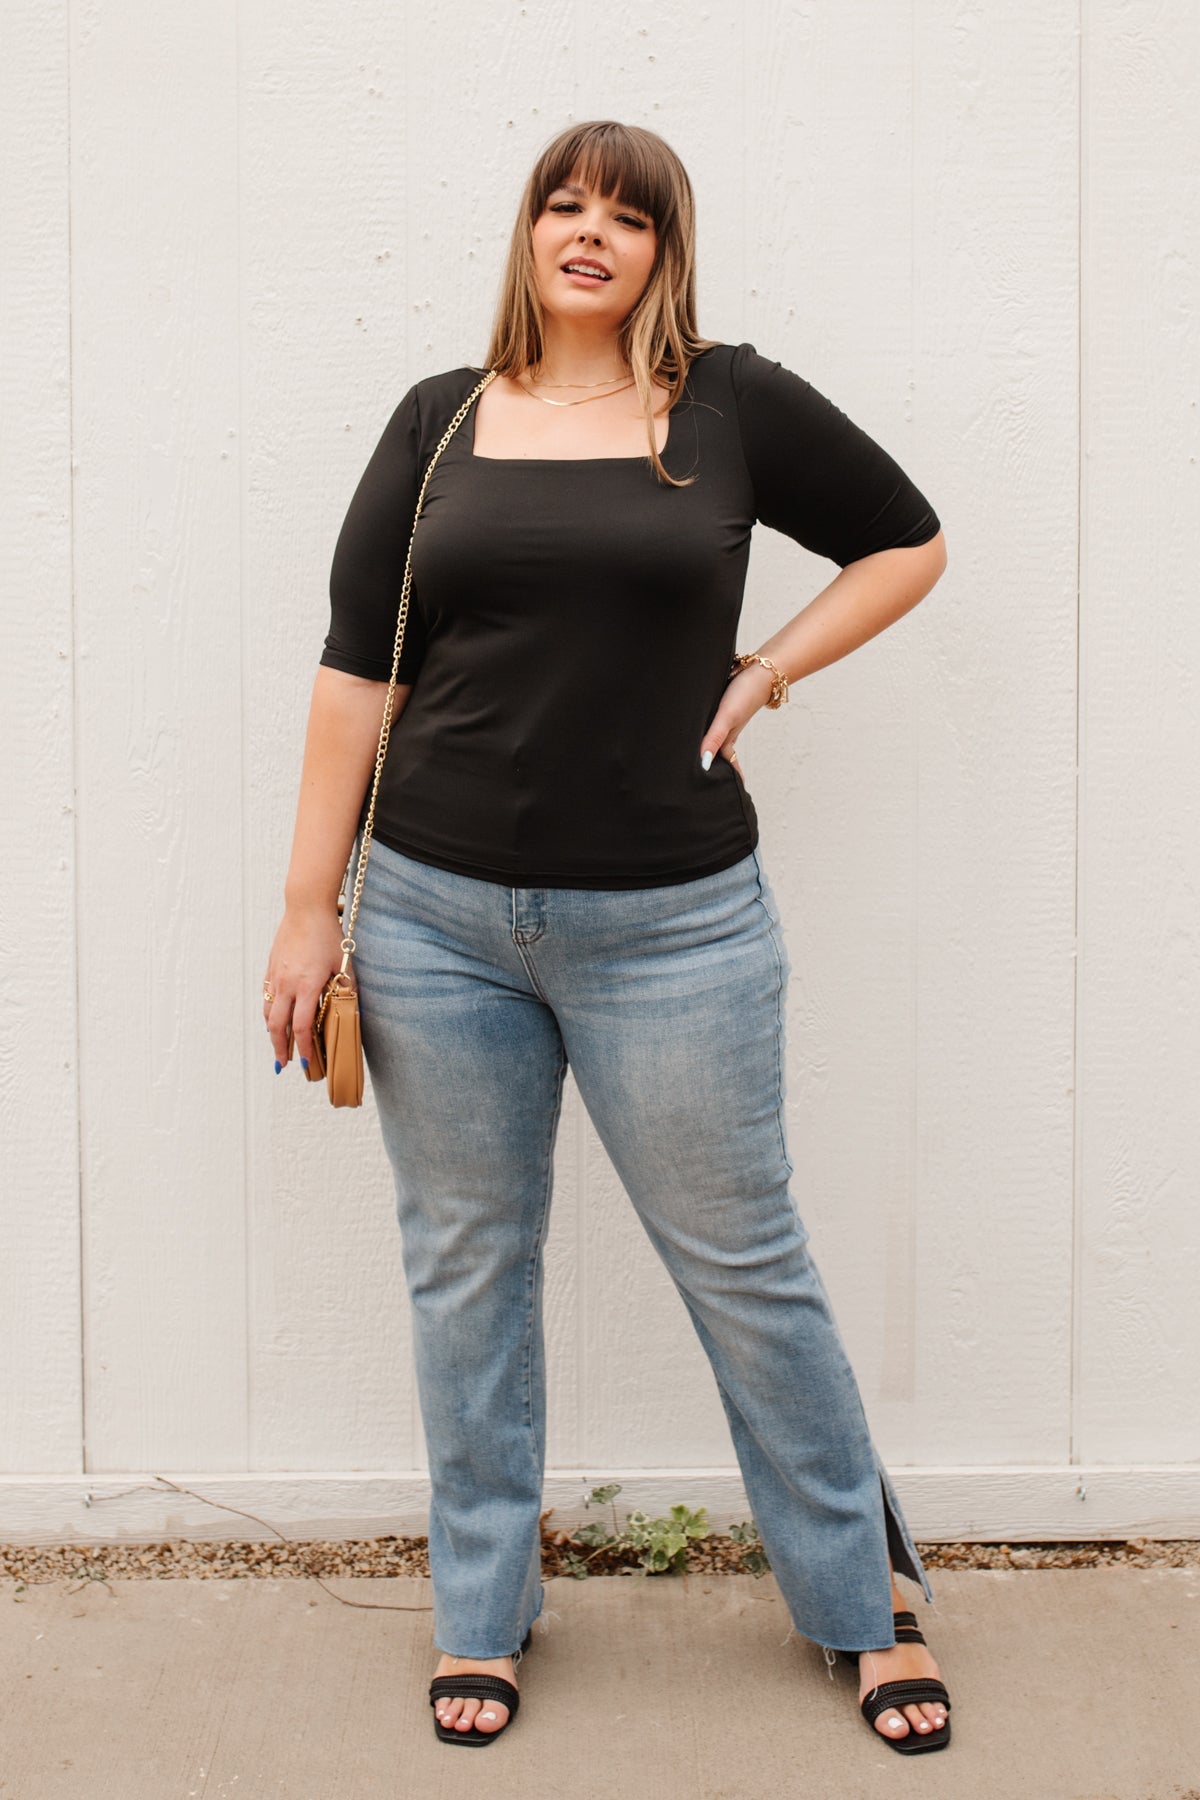 Alyssa Square Neck Tee in Black-Womens-Graceful & Chic Boutique, Family Clothing Store in Waxahachie, Texas